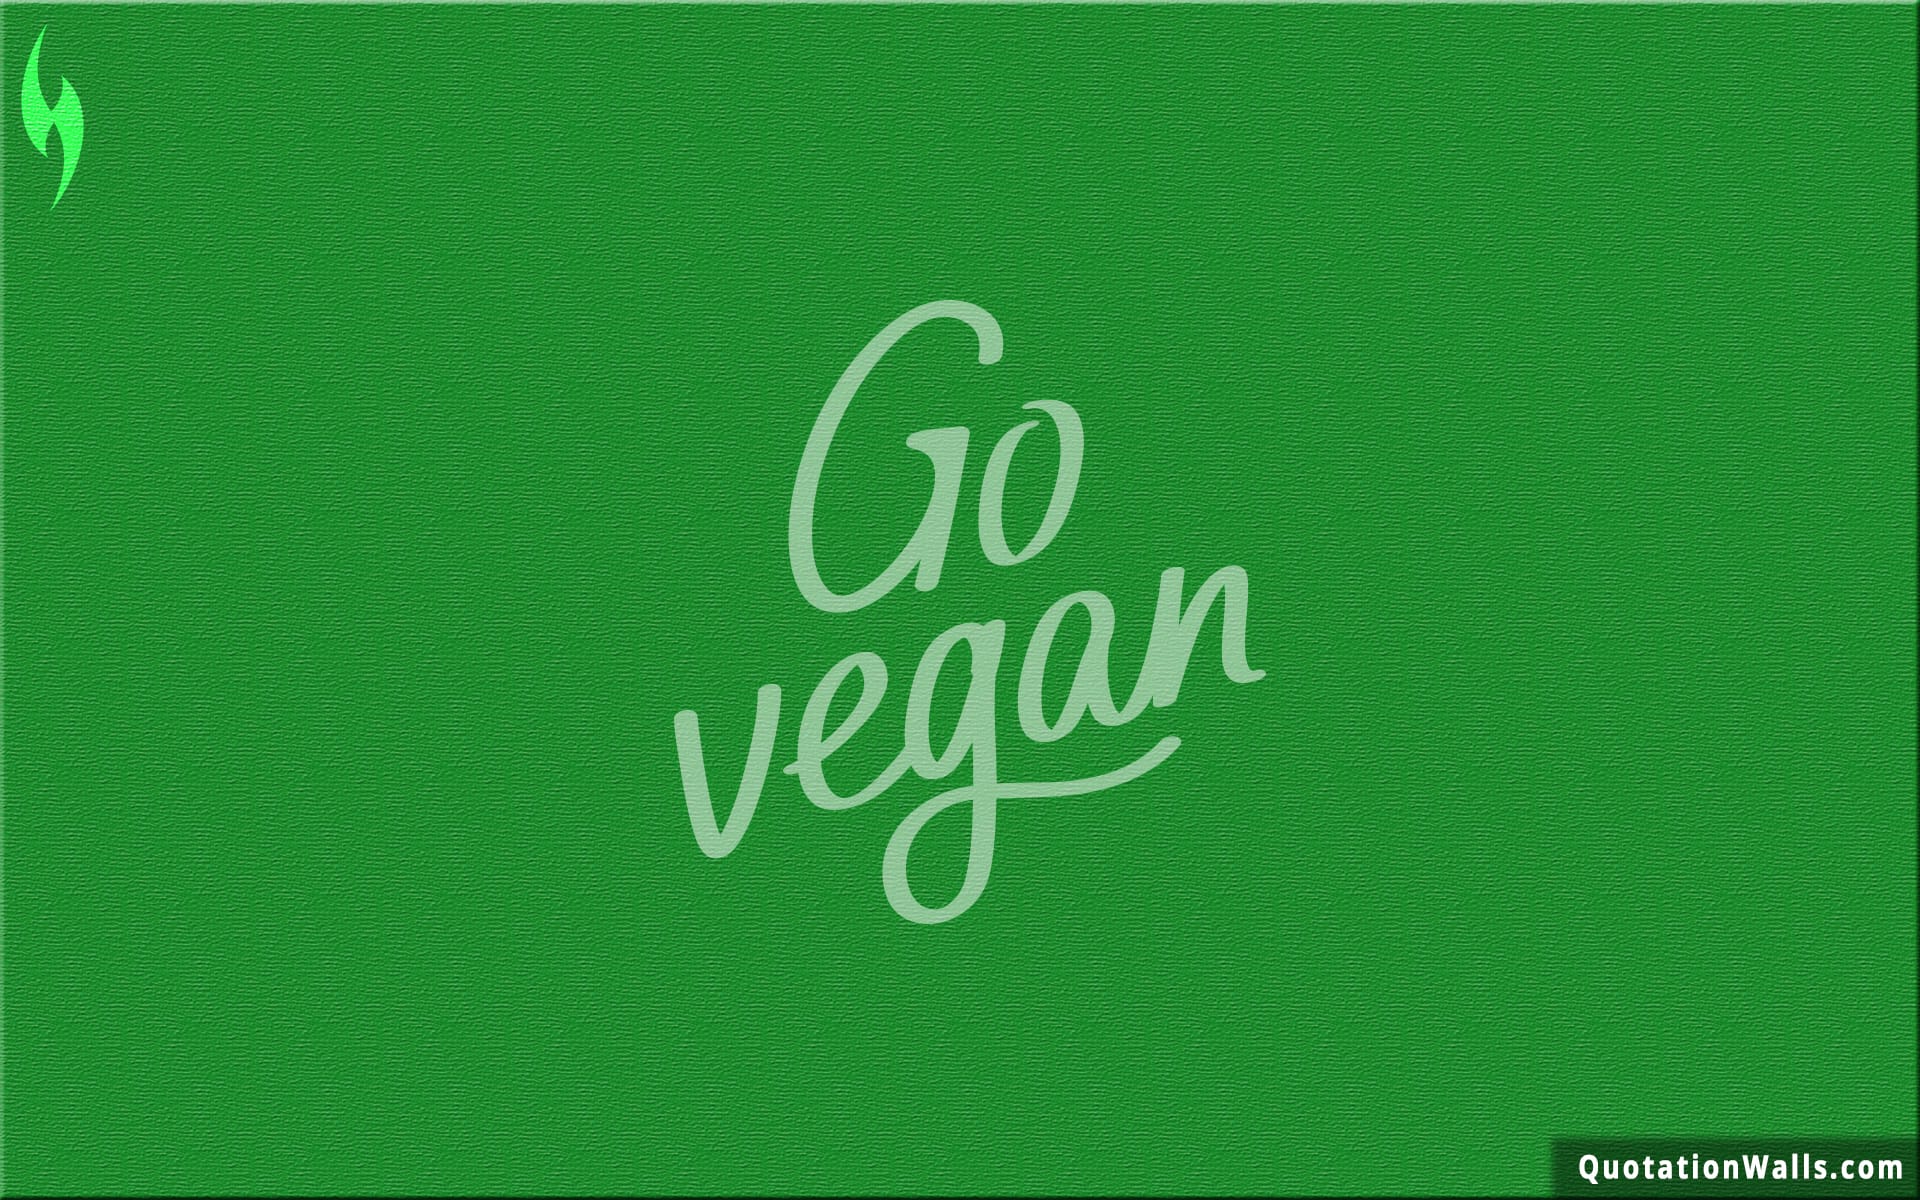 Vegan Quotes Wallpaper For Mobile. Image, Picture, Photo Free